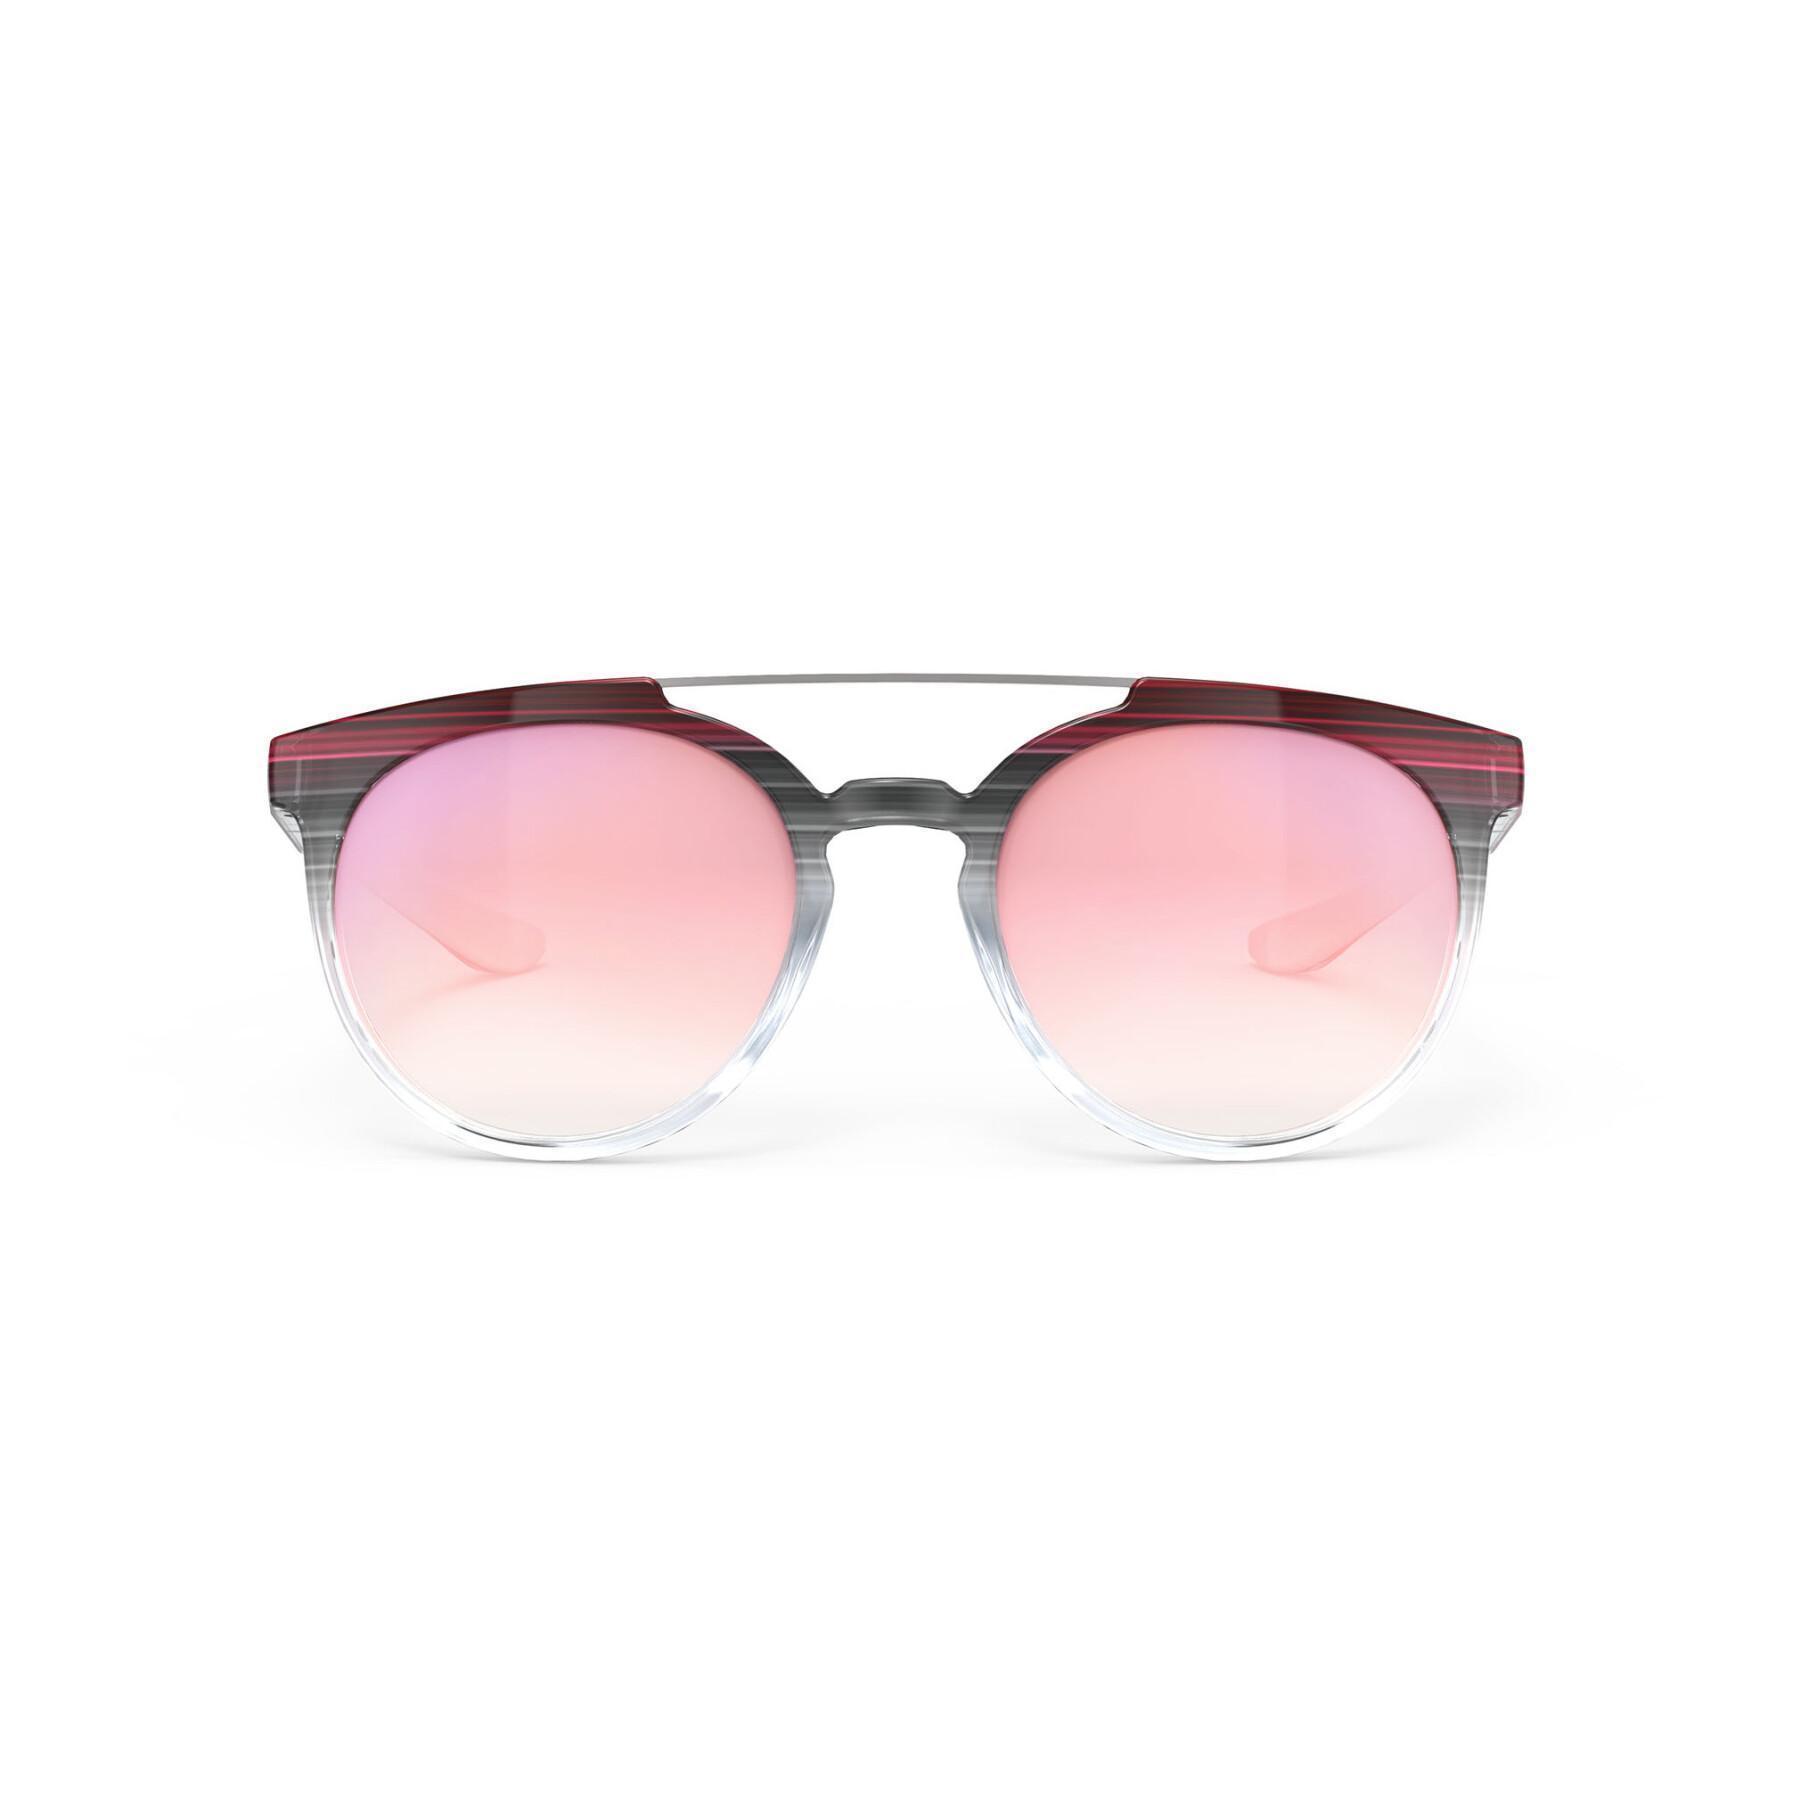 Sonnenbrille Rudy Project Astroloop